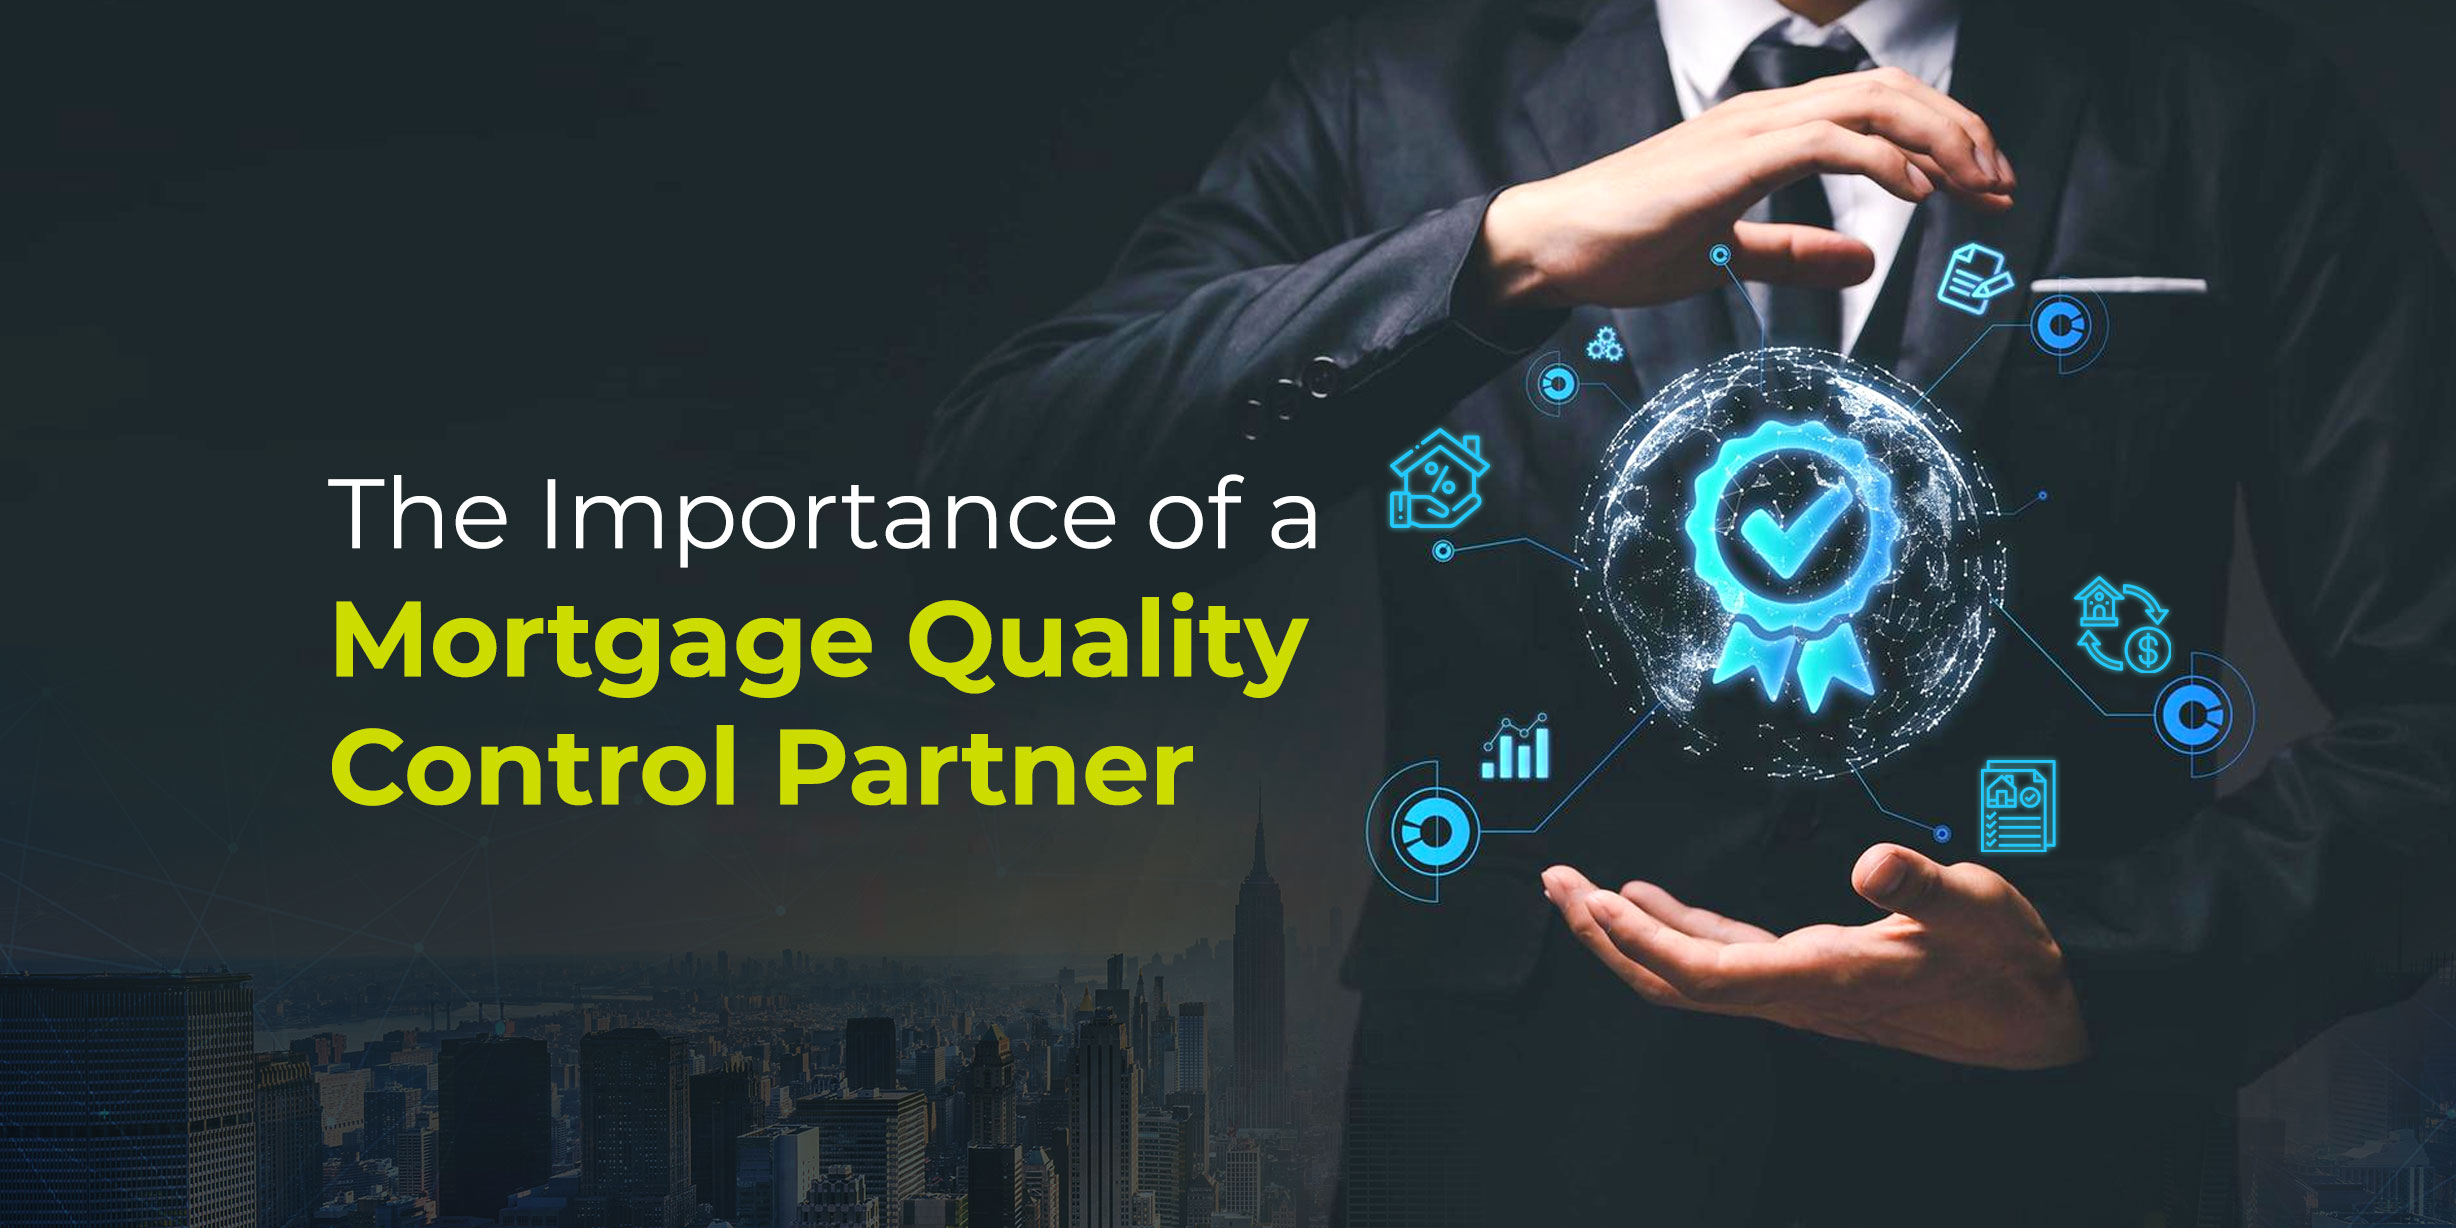 The Importance of a Mortgage Quality Control Partner